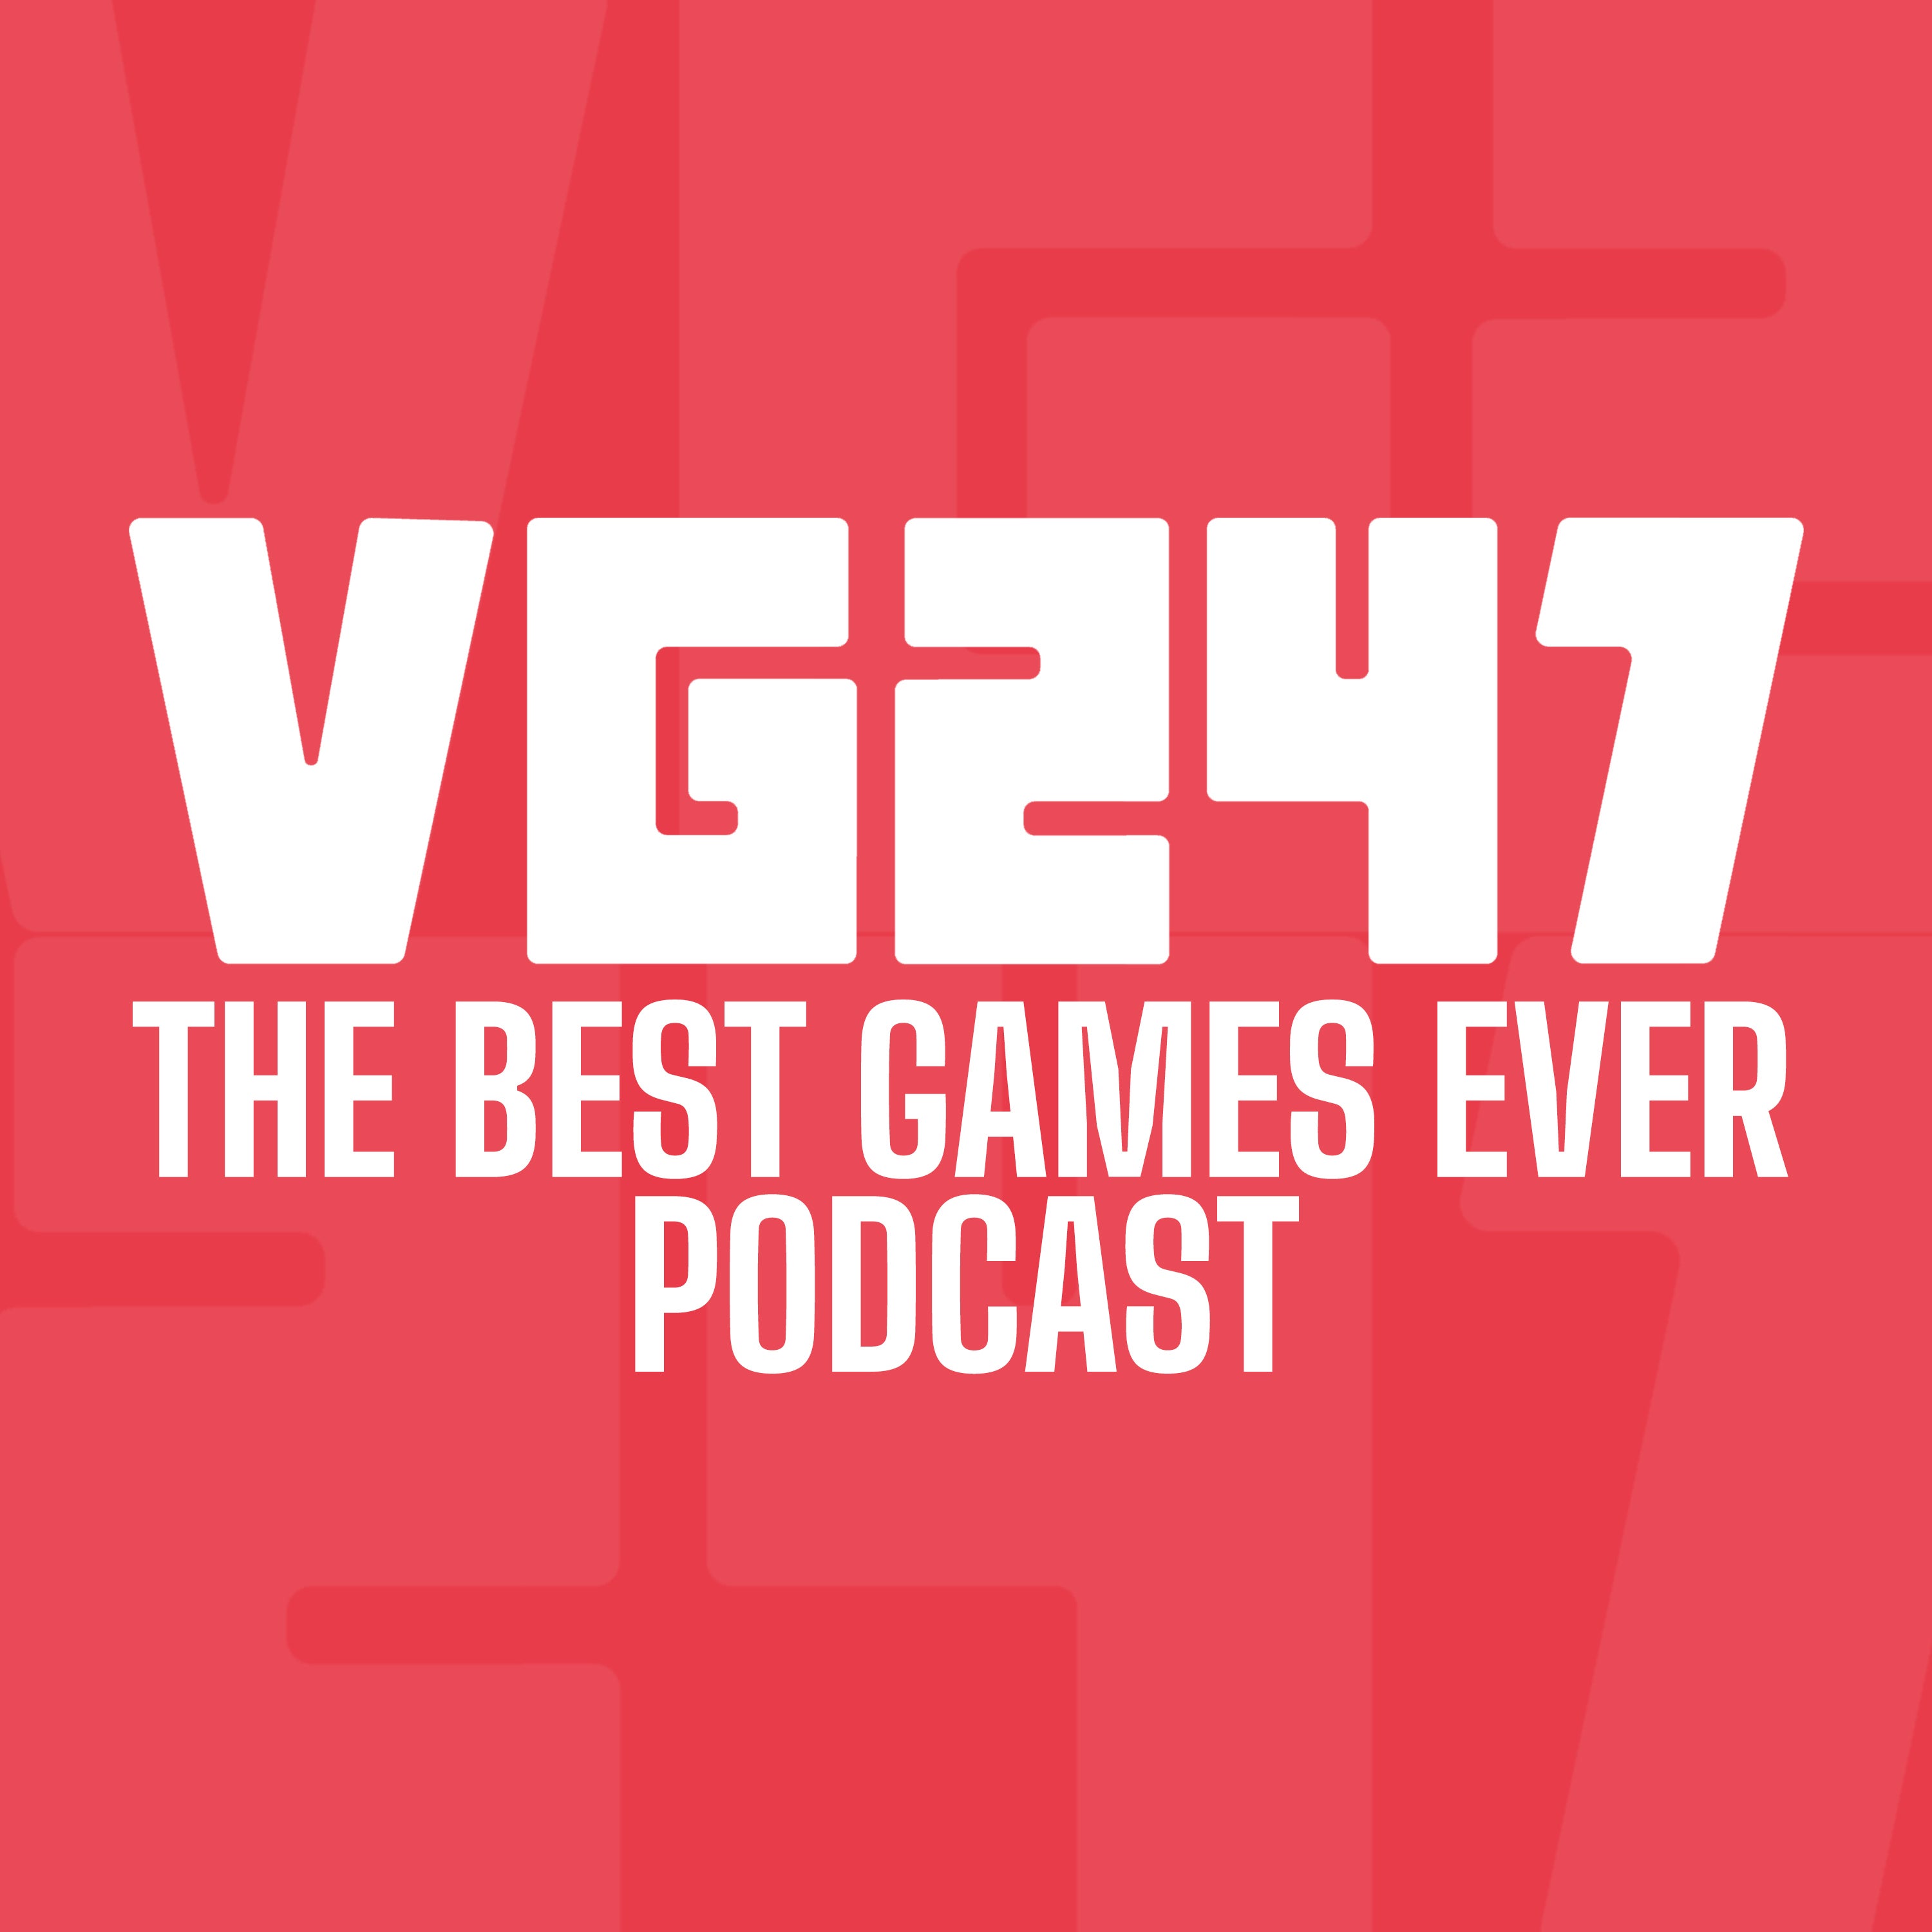 Logo for VG247's Best Games Ever Podcast.  White text on a red background.